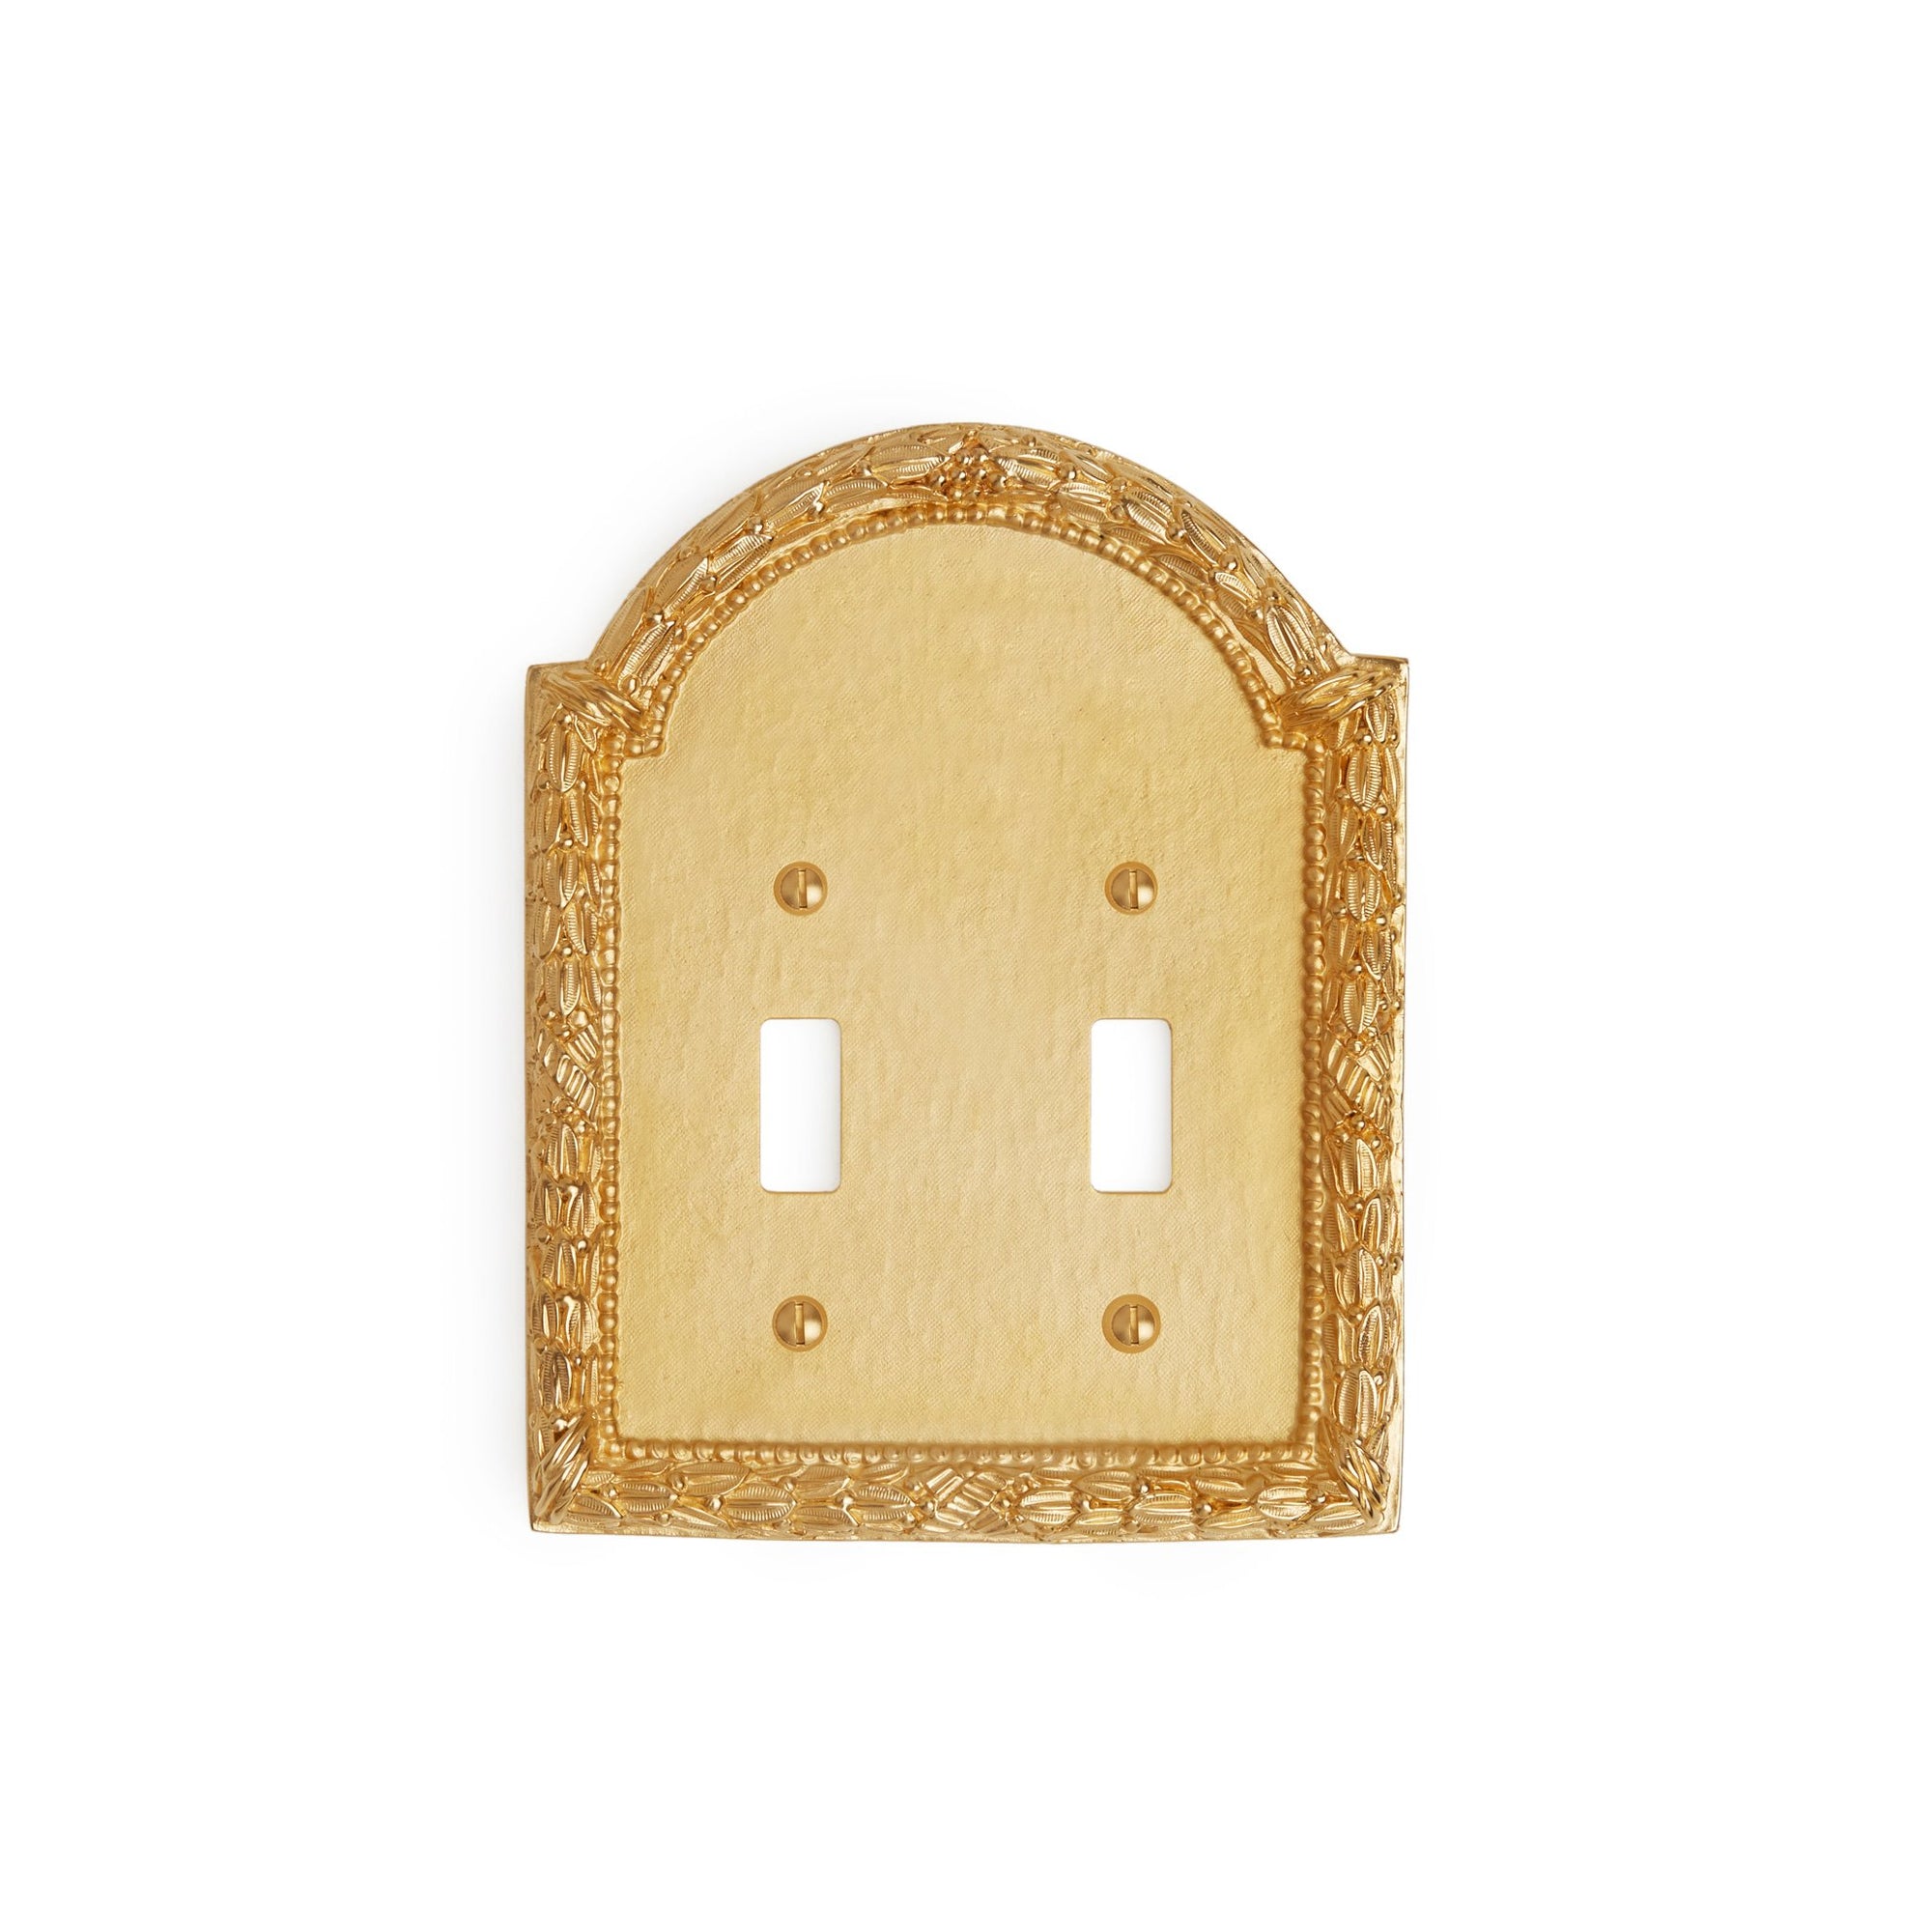 0459D-SWT-GP Sherle Wagner International Acanthus Double Switch Plate in Gold Plate metal finish